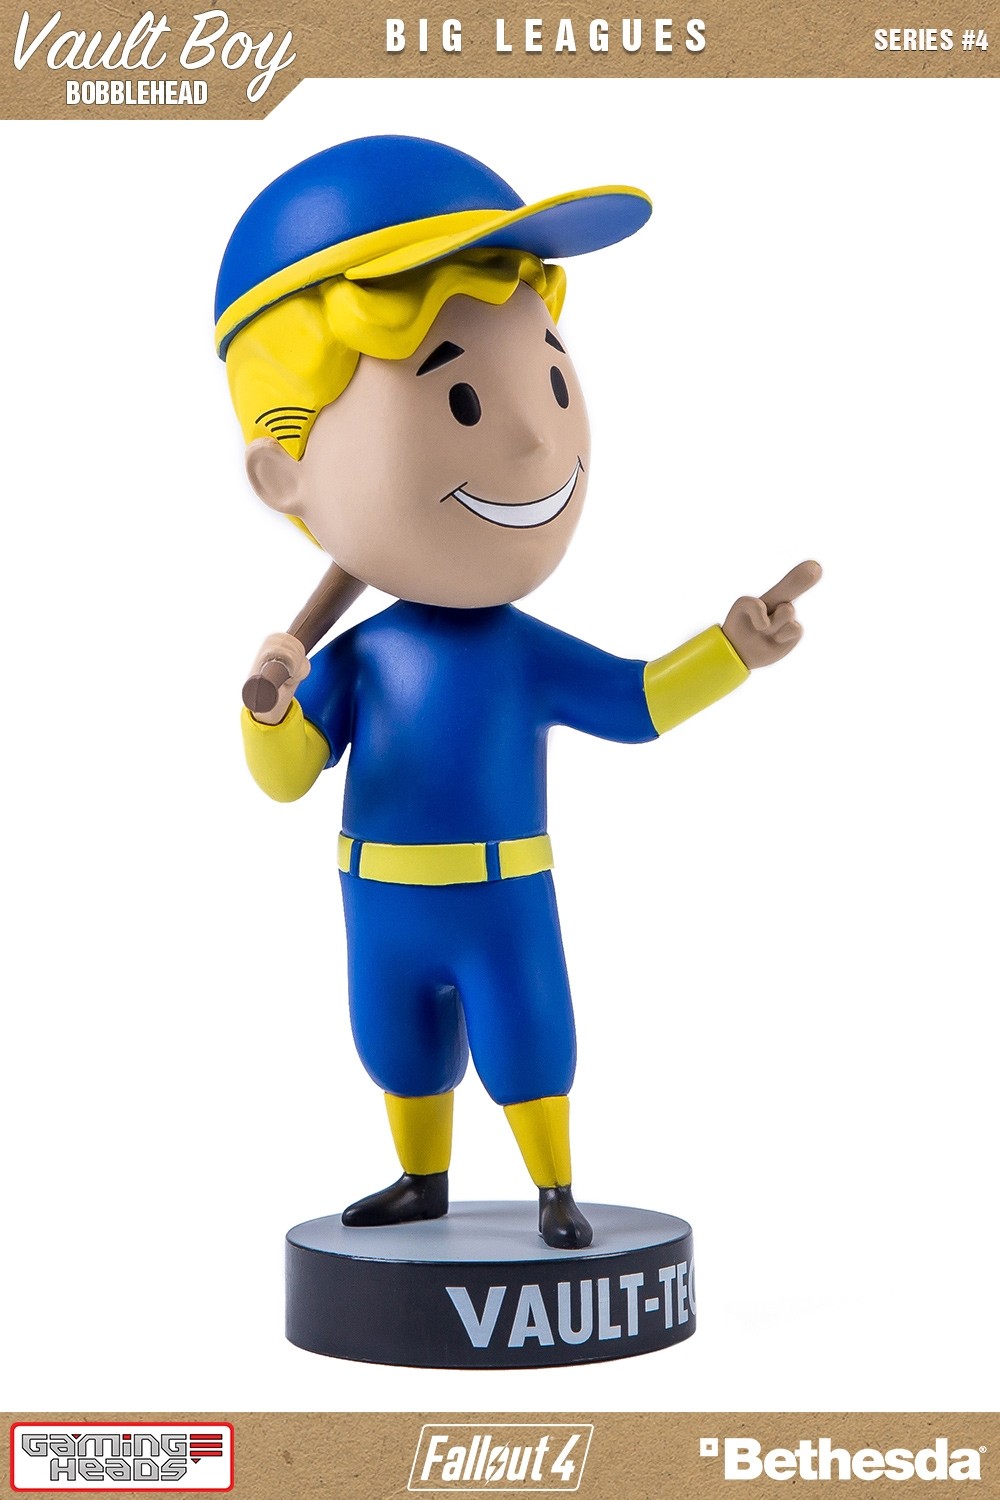 Bobbleheads in fallout 4 фото 94